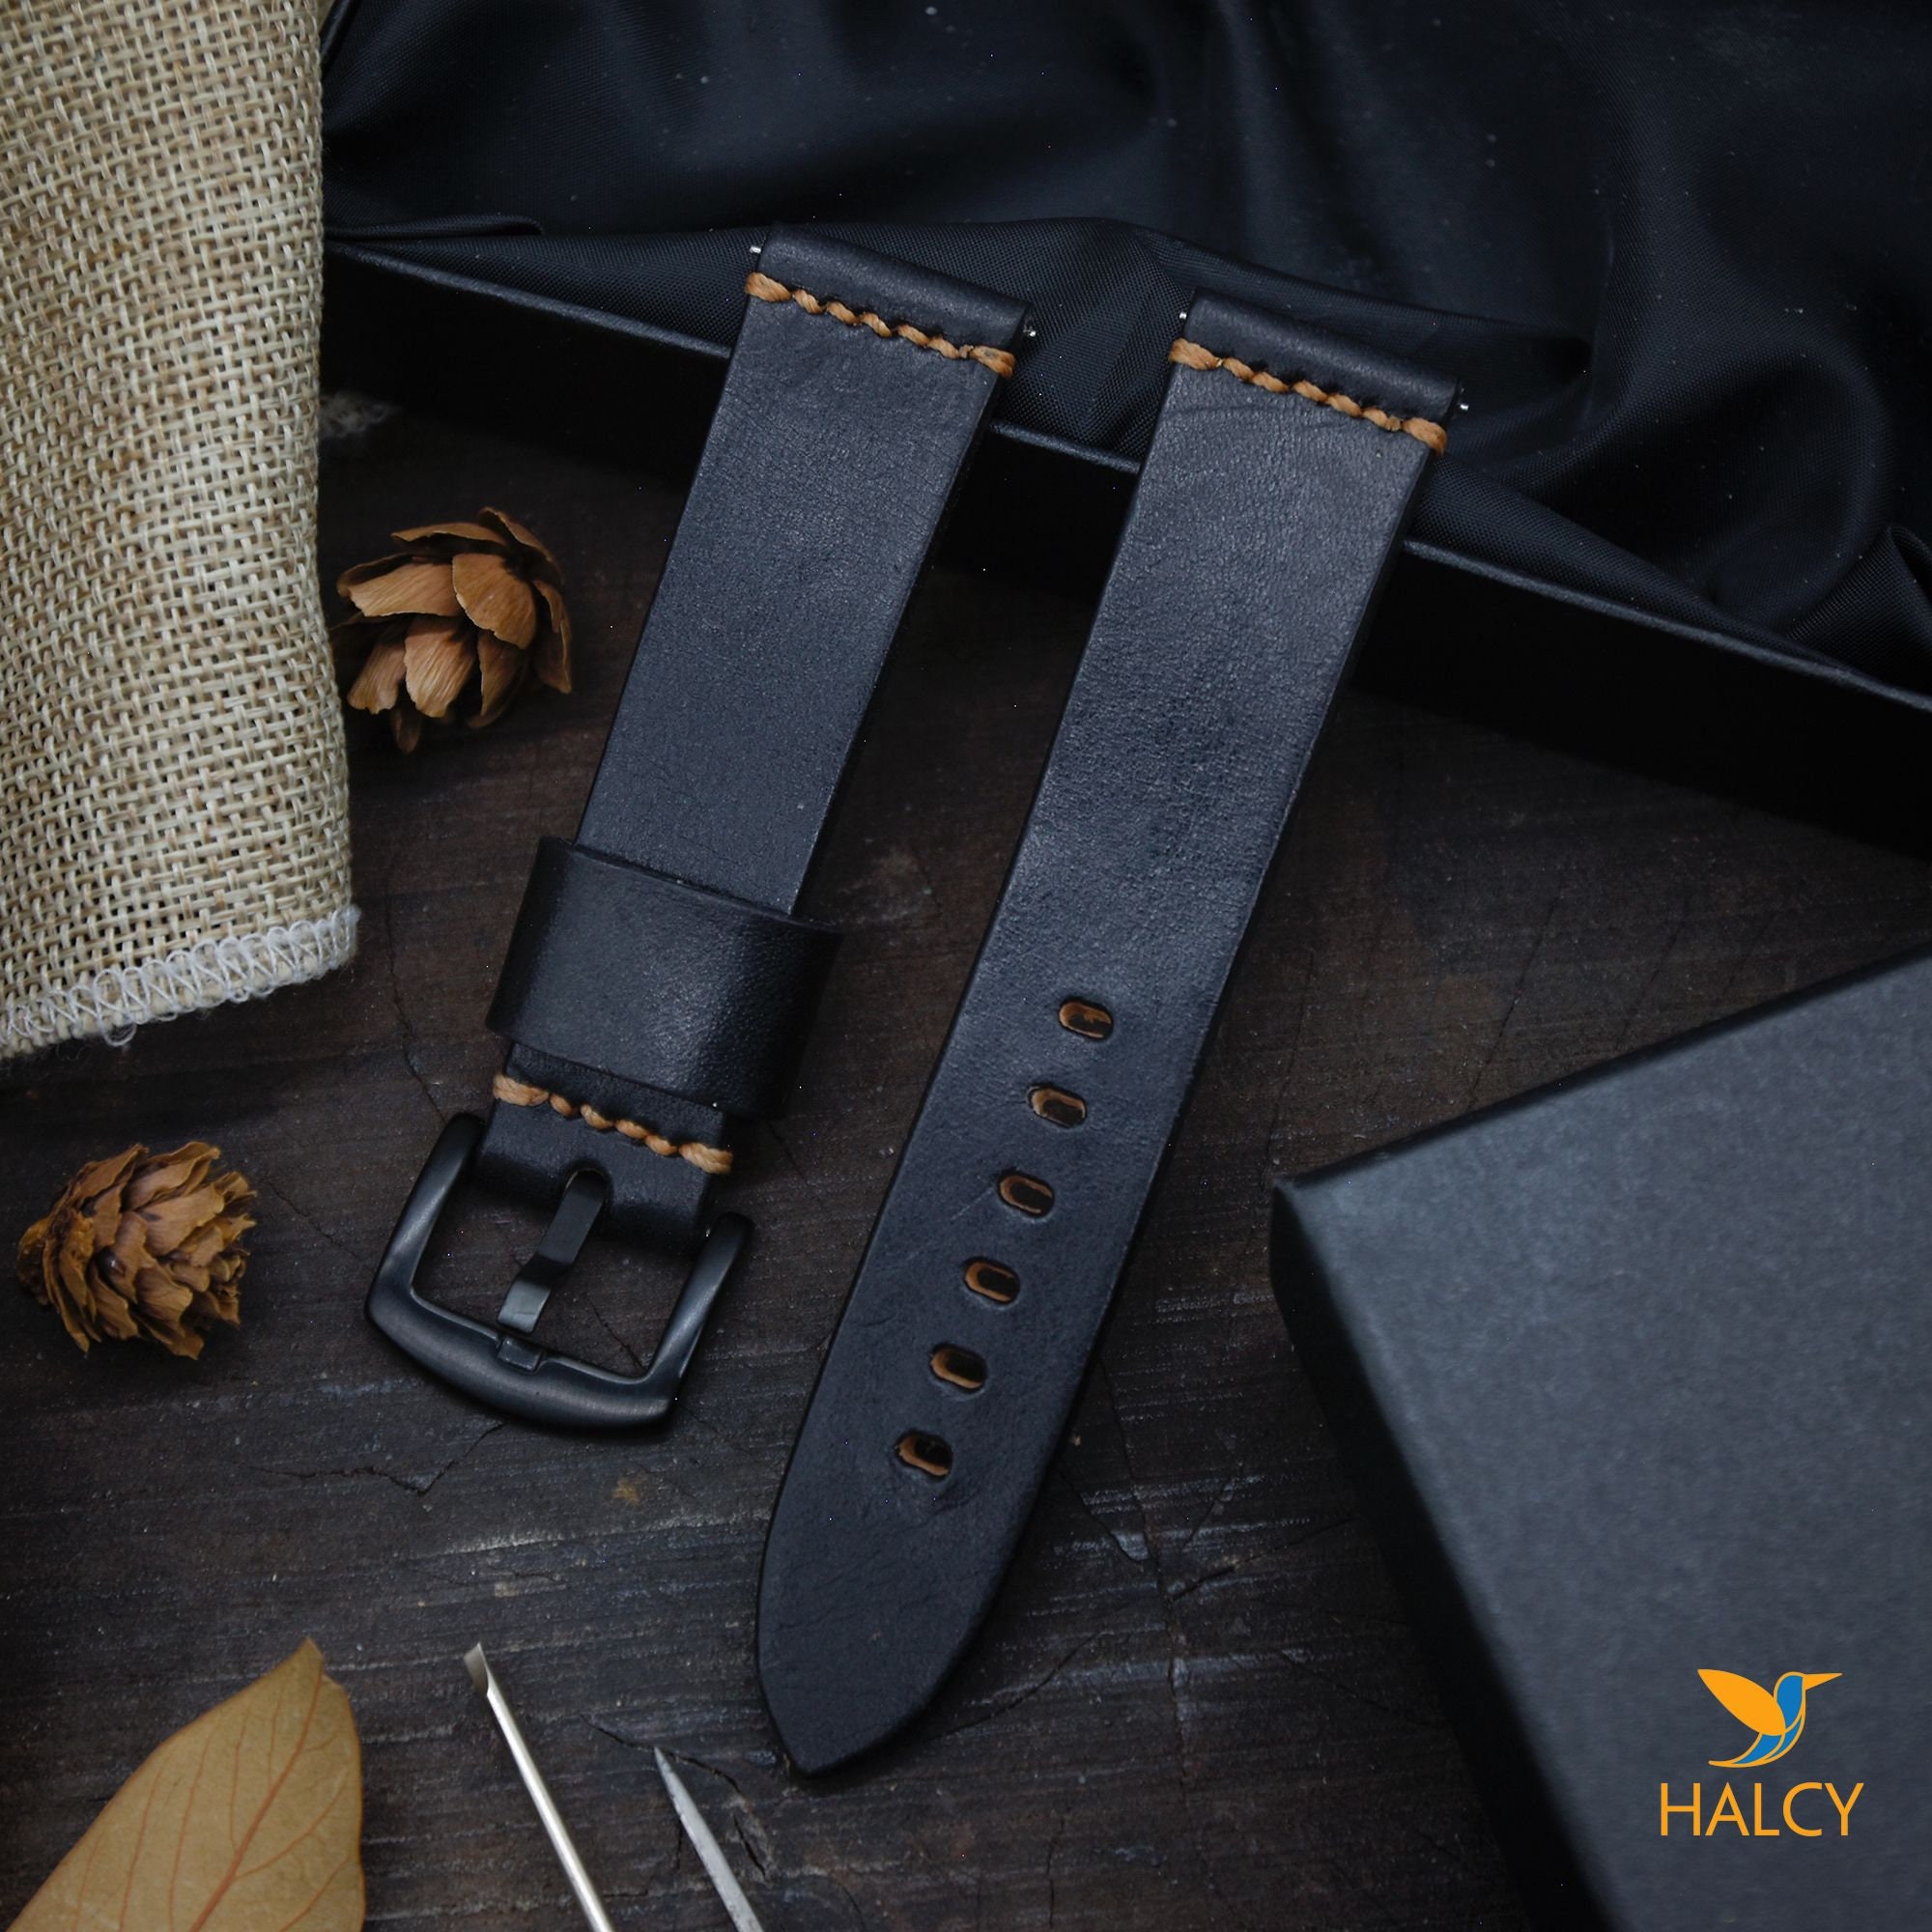 With Strap, Cowhide Leather Spring Watch Bars, Choice - Tanned Etsy Leather Width, Choice Buckle Quick-release Black of Color Vegetable Italian